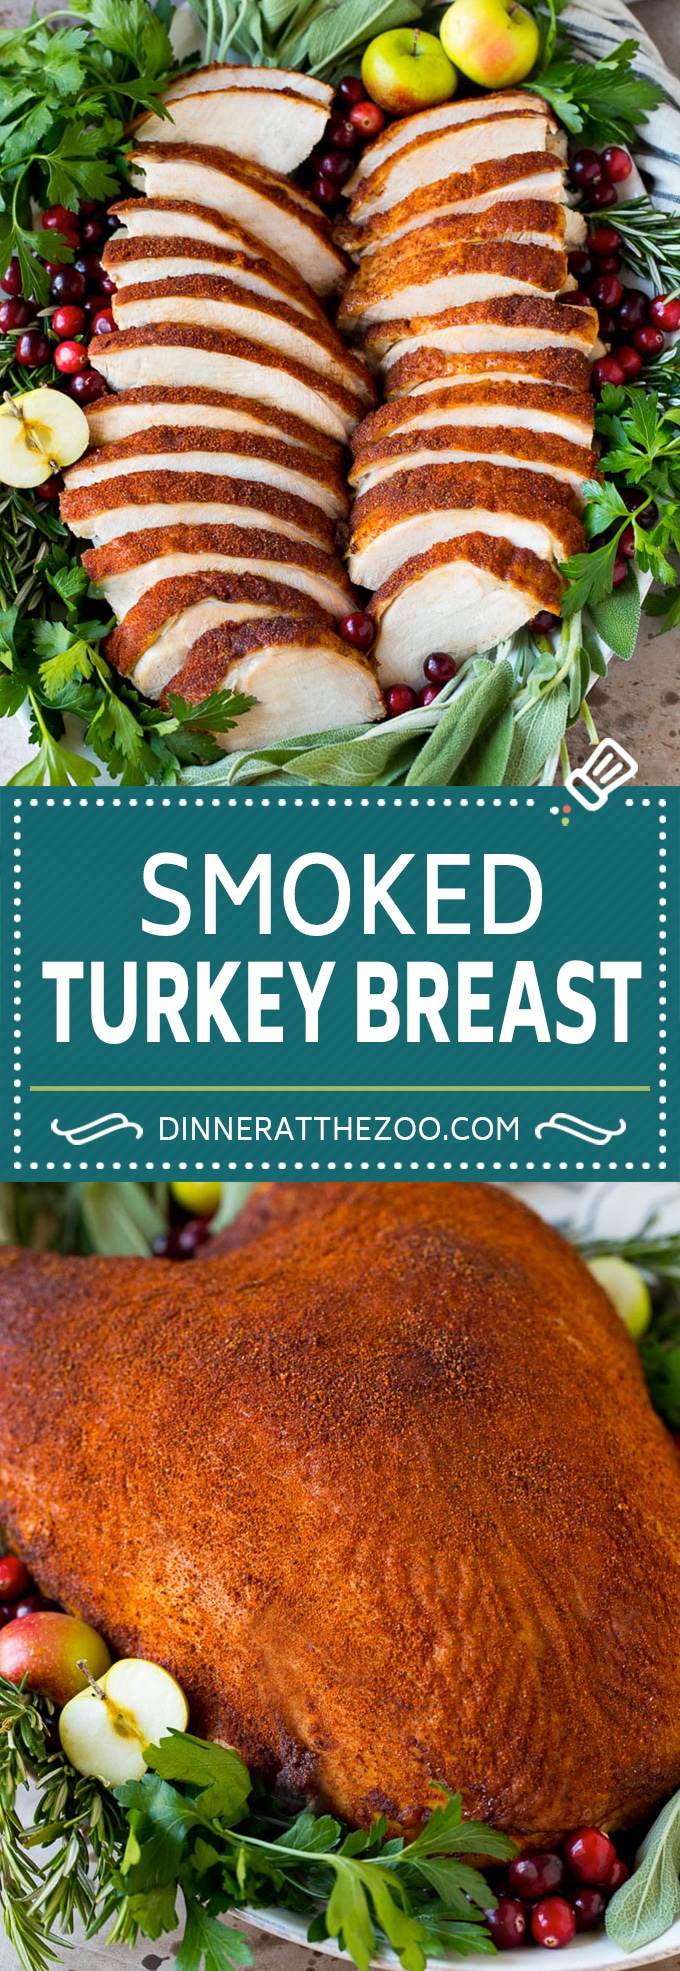 This smoked turkey breast is soaked in brine, then coated in homemade spice rub and cooked on a smoker until it is tender and juicy.